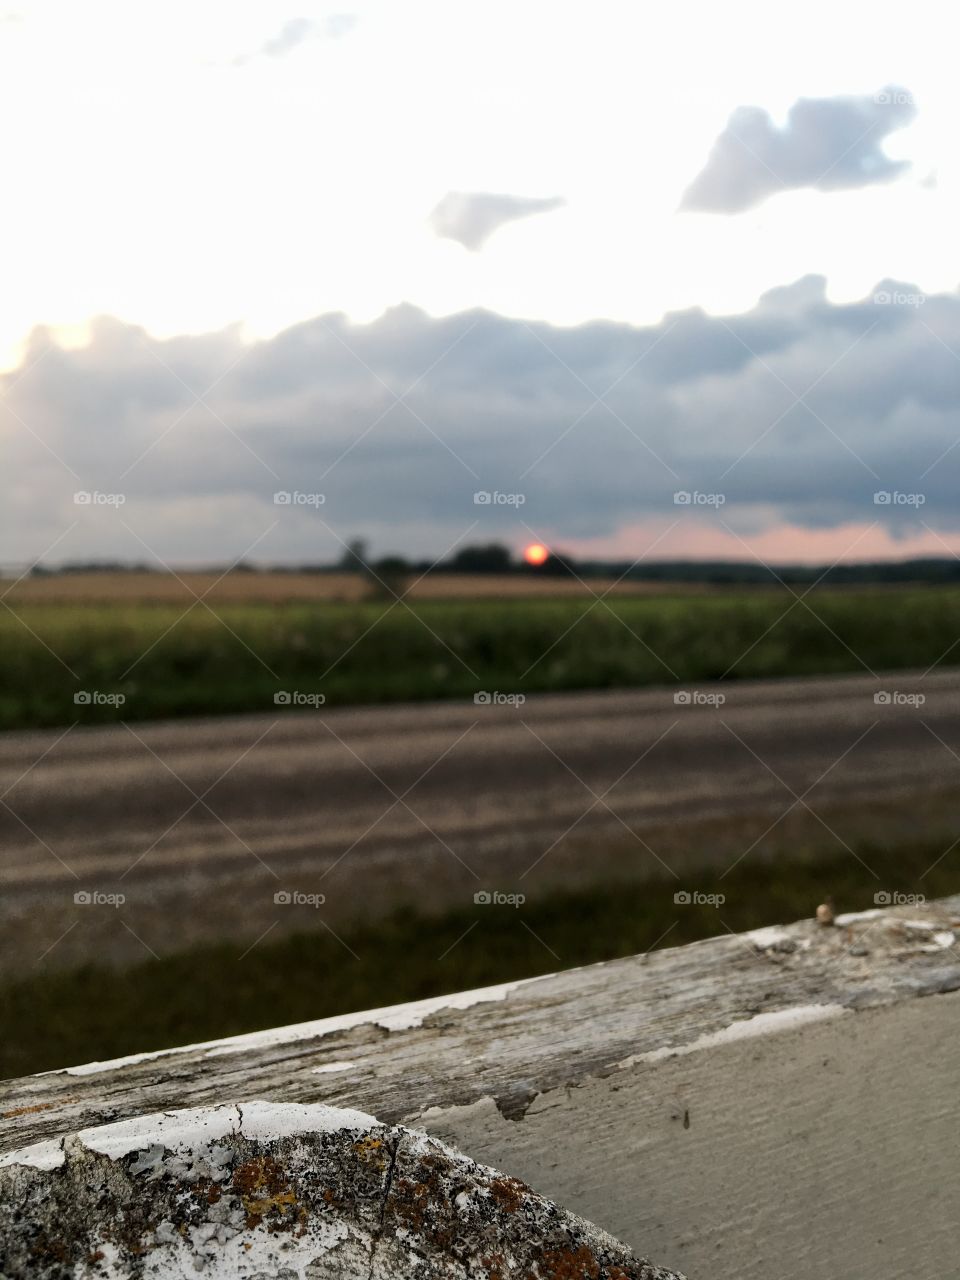 Fluffy forming storm clouds overtop a setting sun. In the foreground is a aged white fence. Behind the fence is a gravel road, then endless fields.